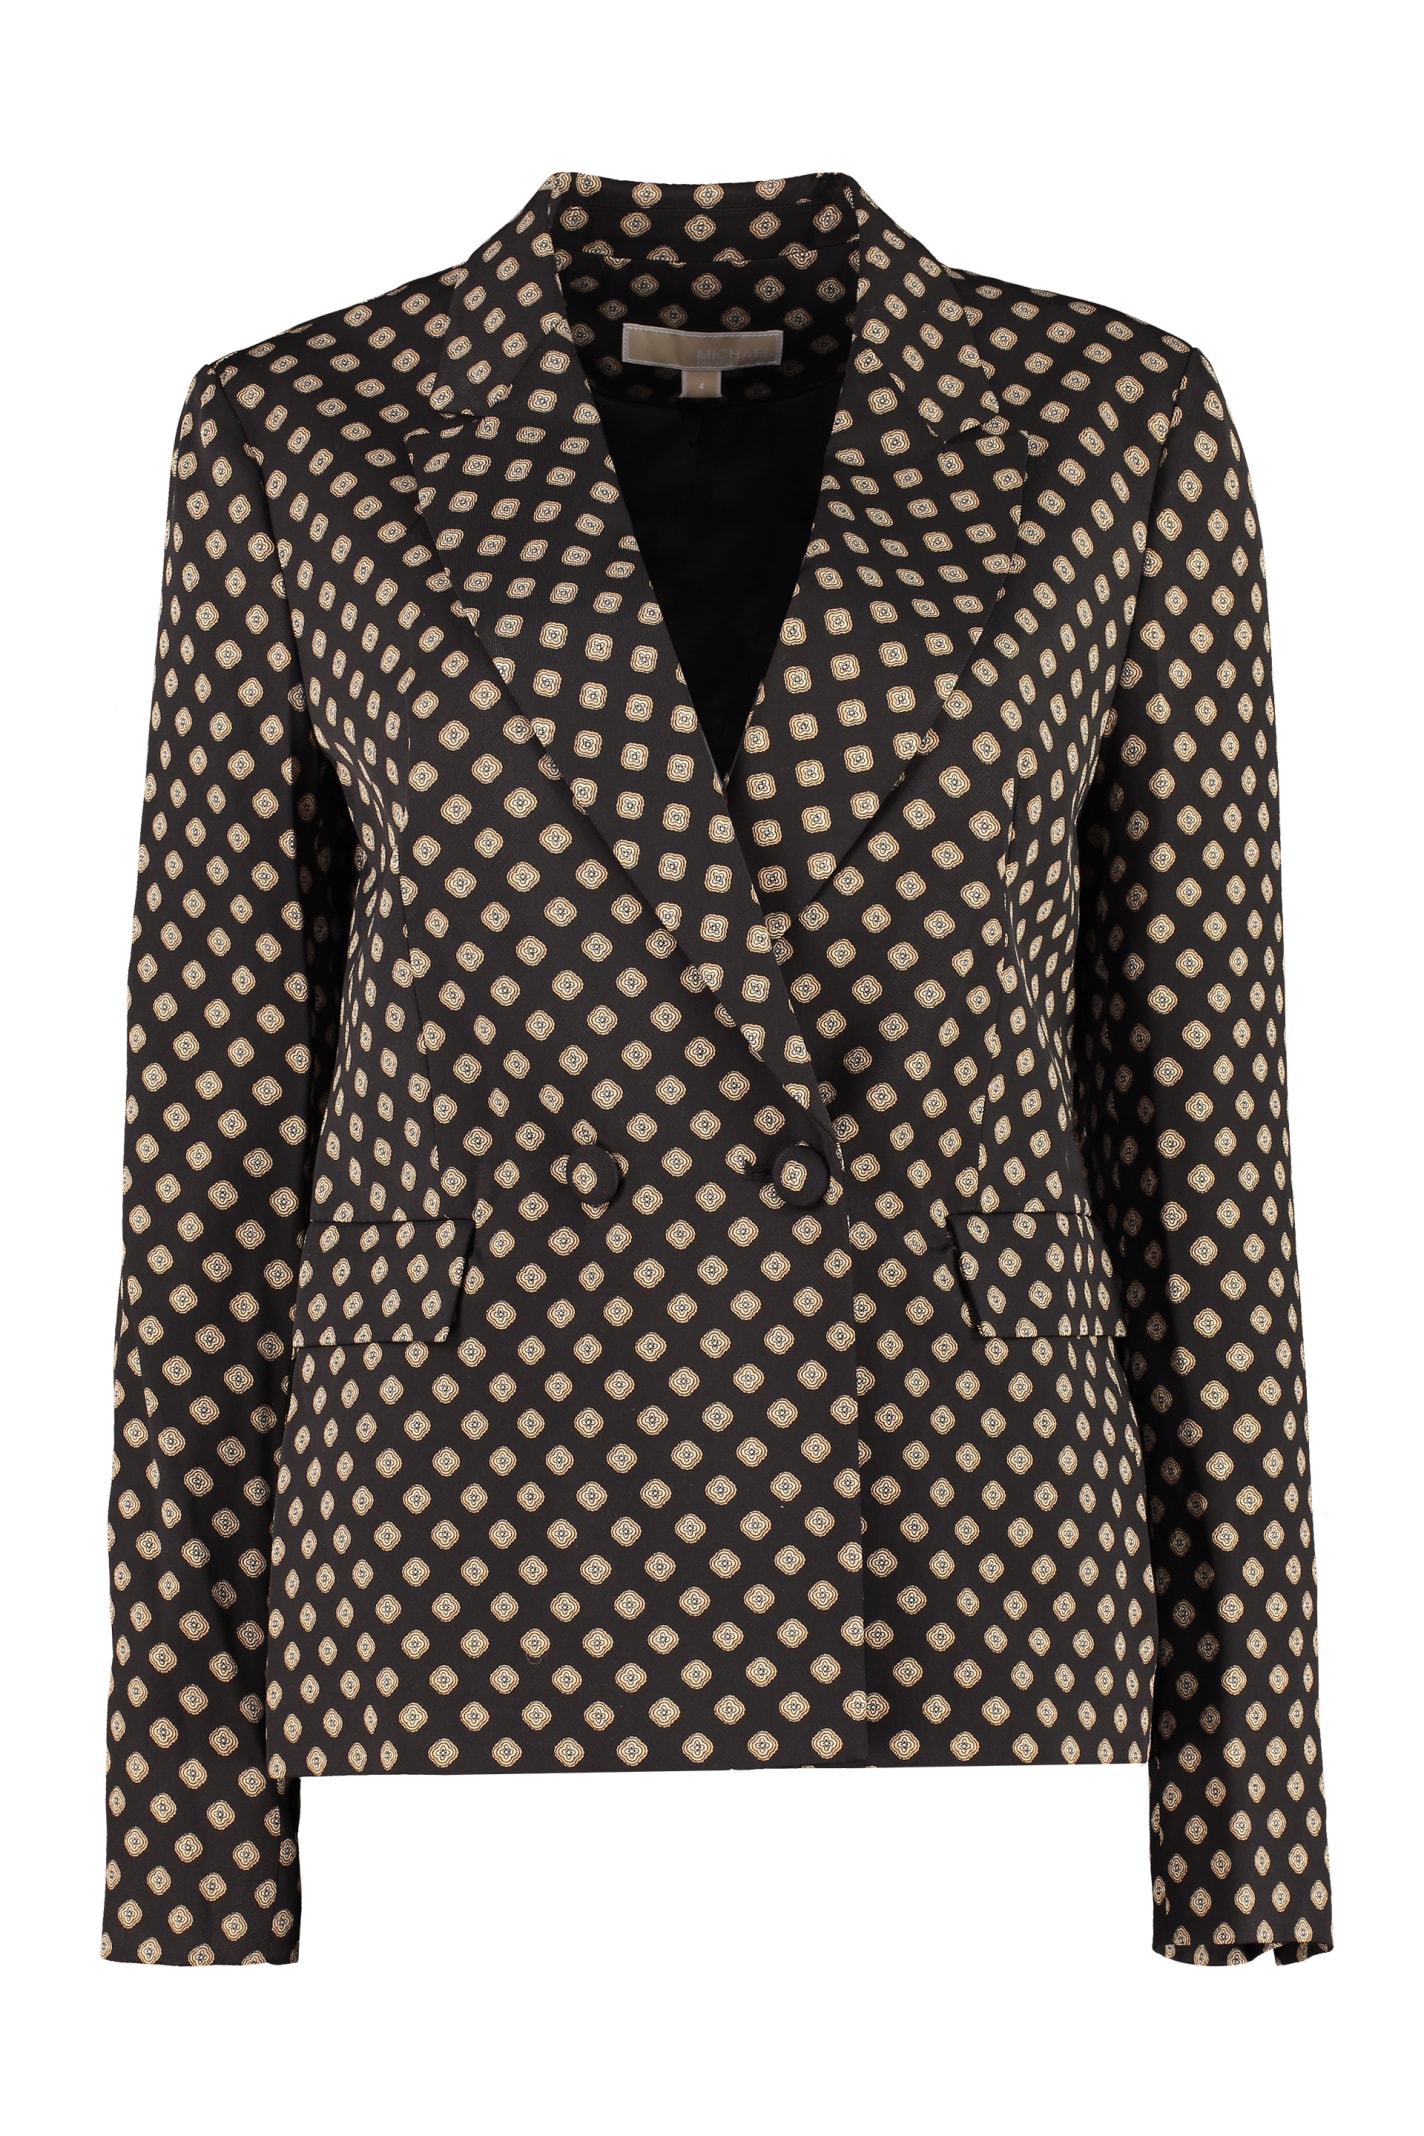 MICHAEL Michael Kors Printed Double Breasted Blazer